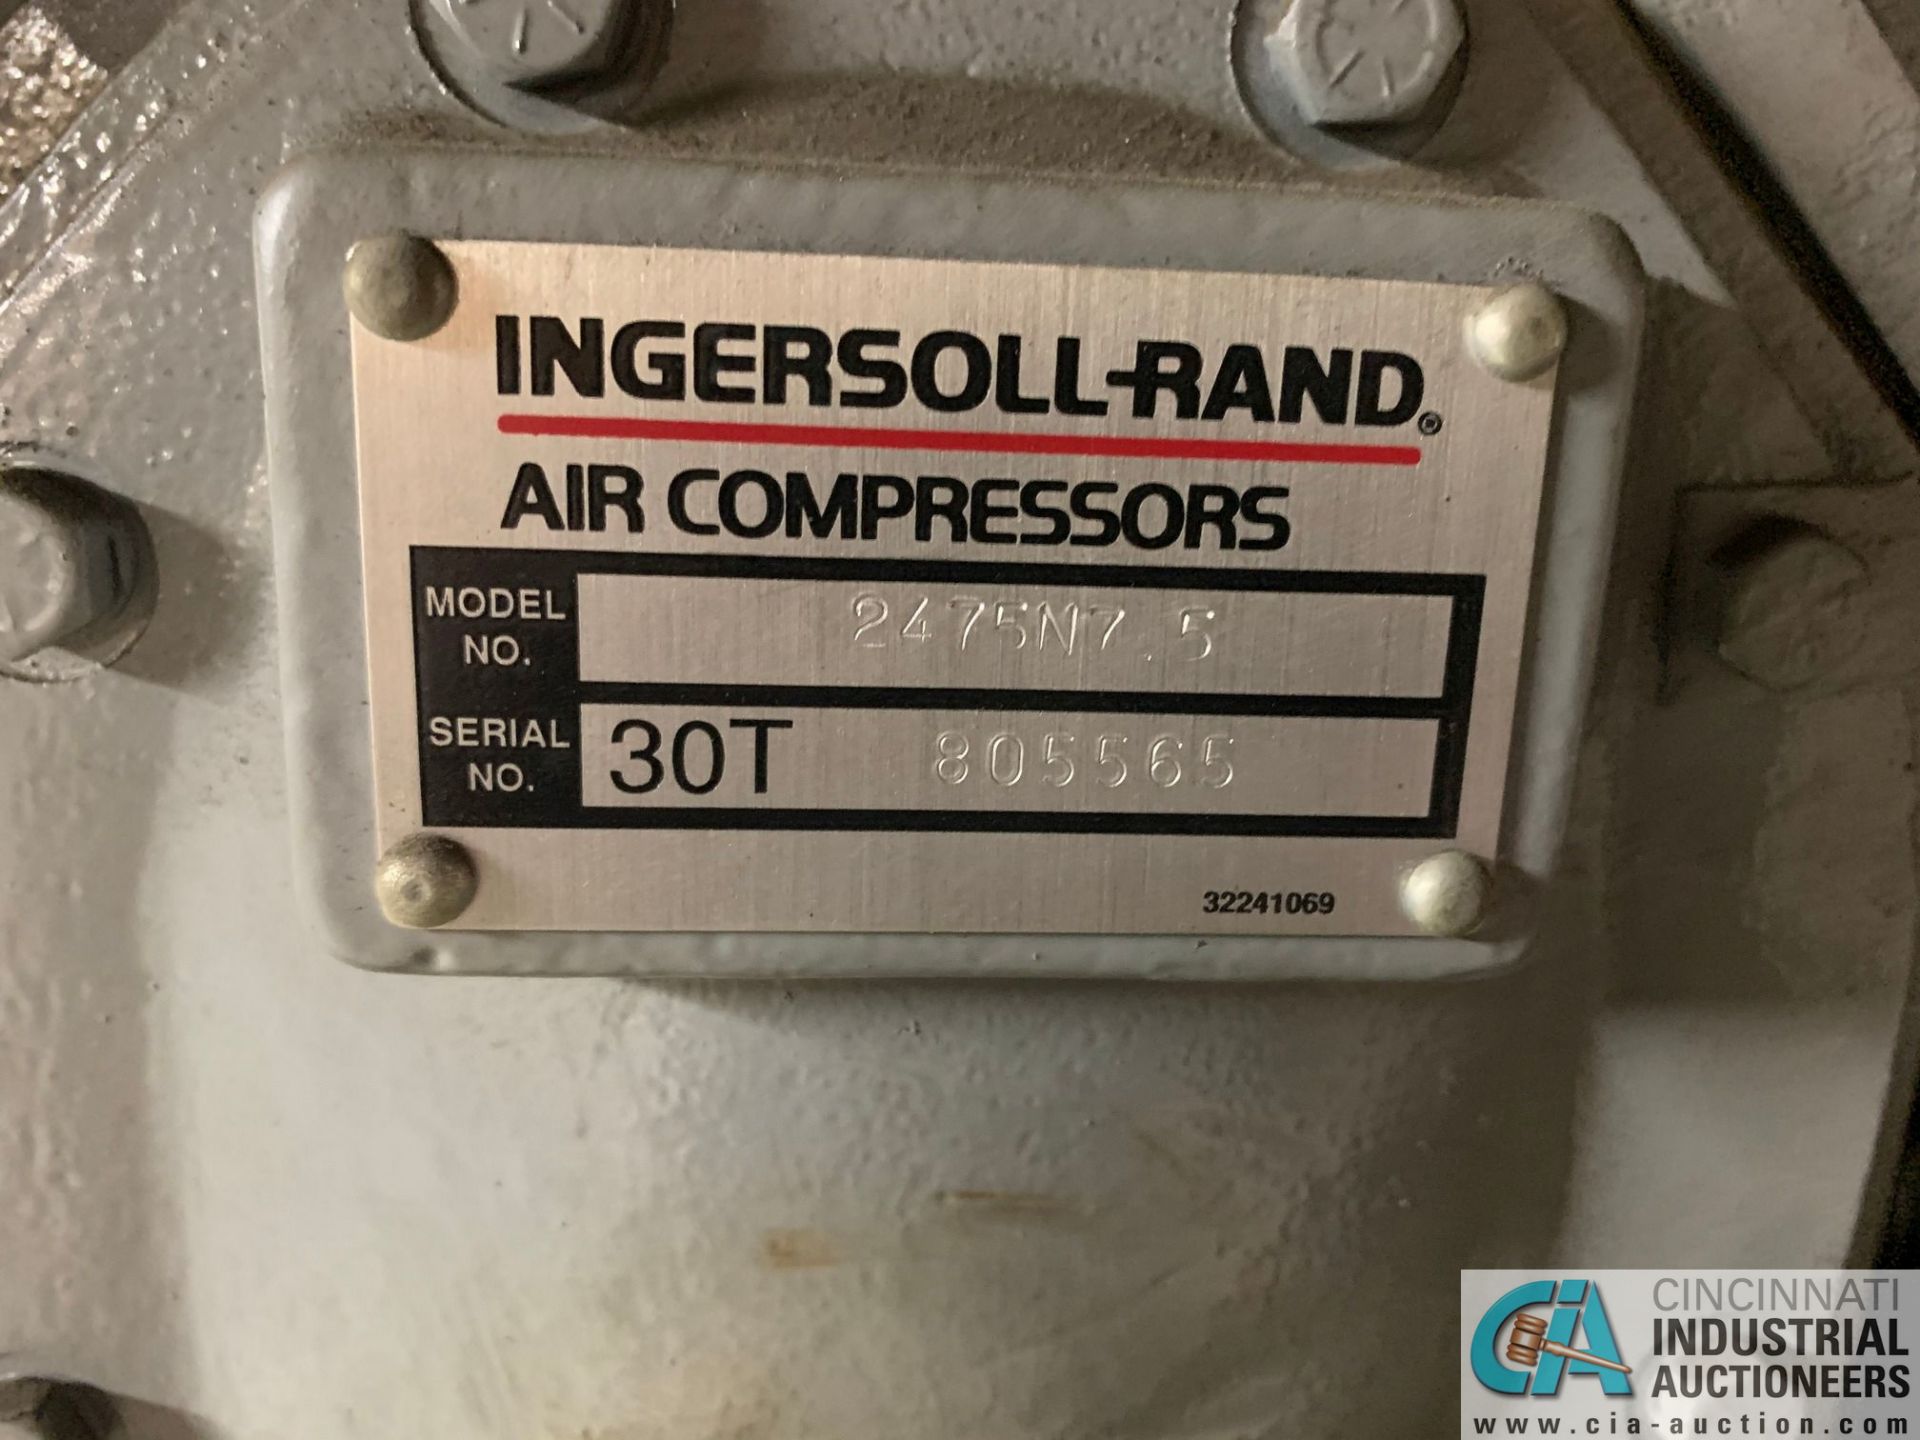 7.5 HP INGERSOLL-RAND MODEL 2475N7.5230 VERTICAL TANK AIR COMPRESSOR, WITH CURTIS MODEL CHT35 - Image 3 of 6